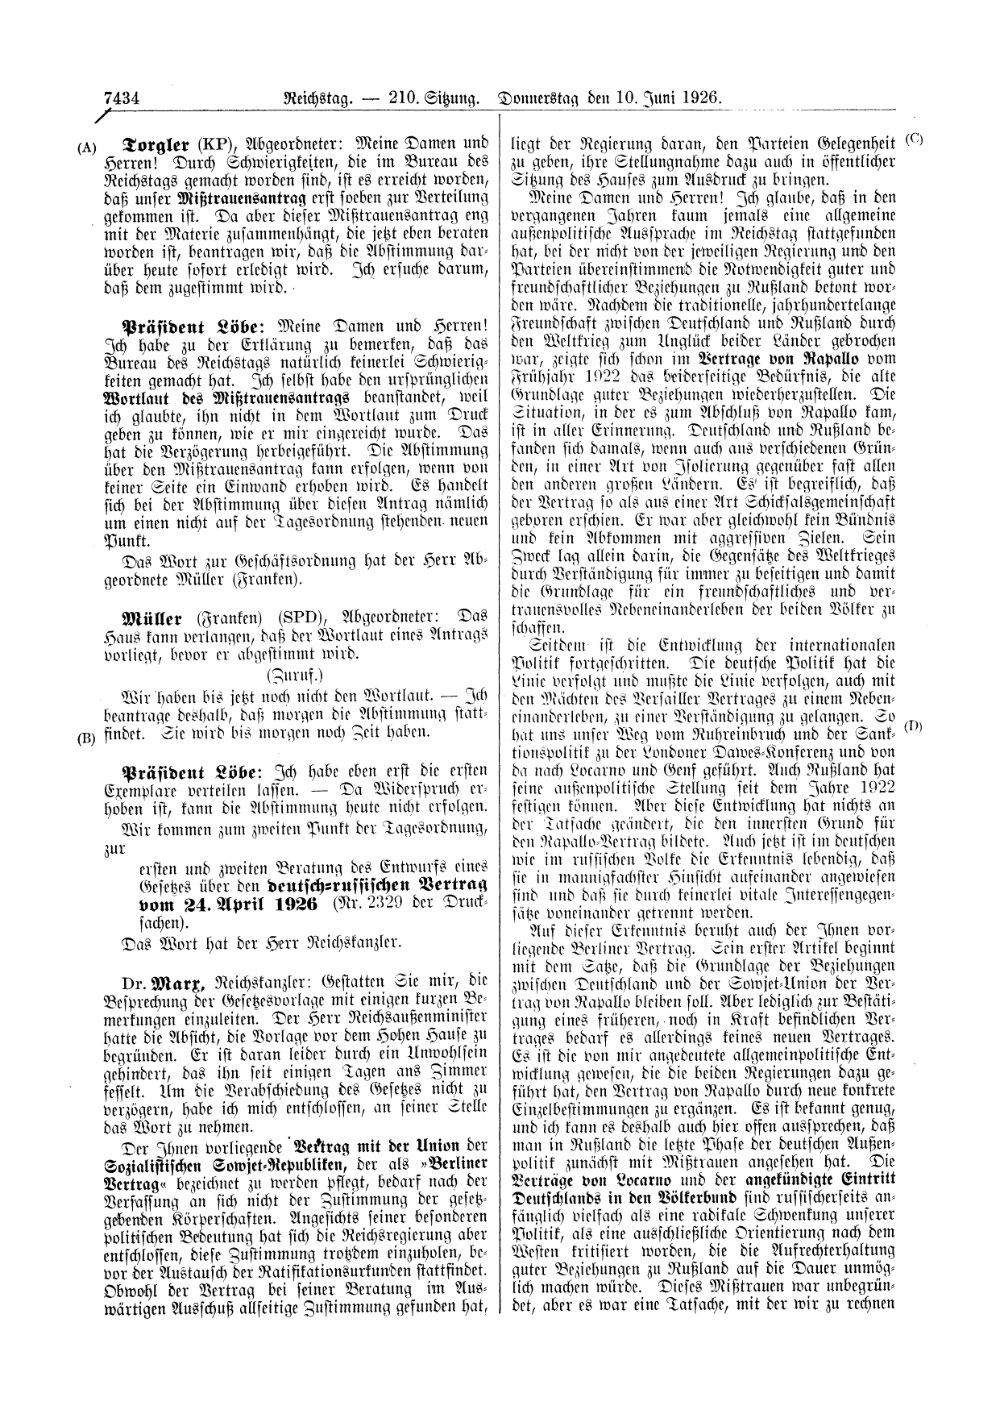 Scan of page 7434